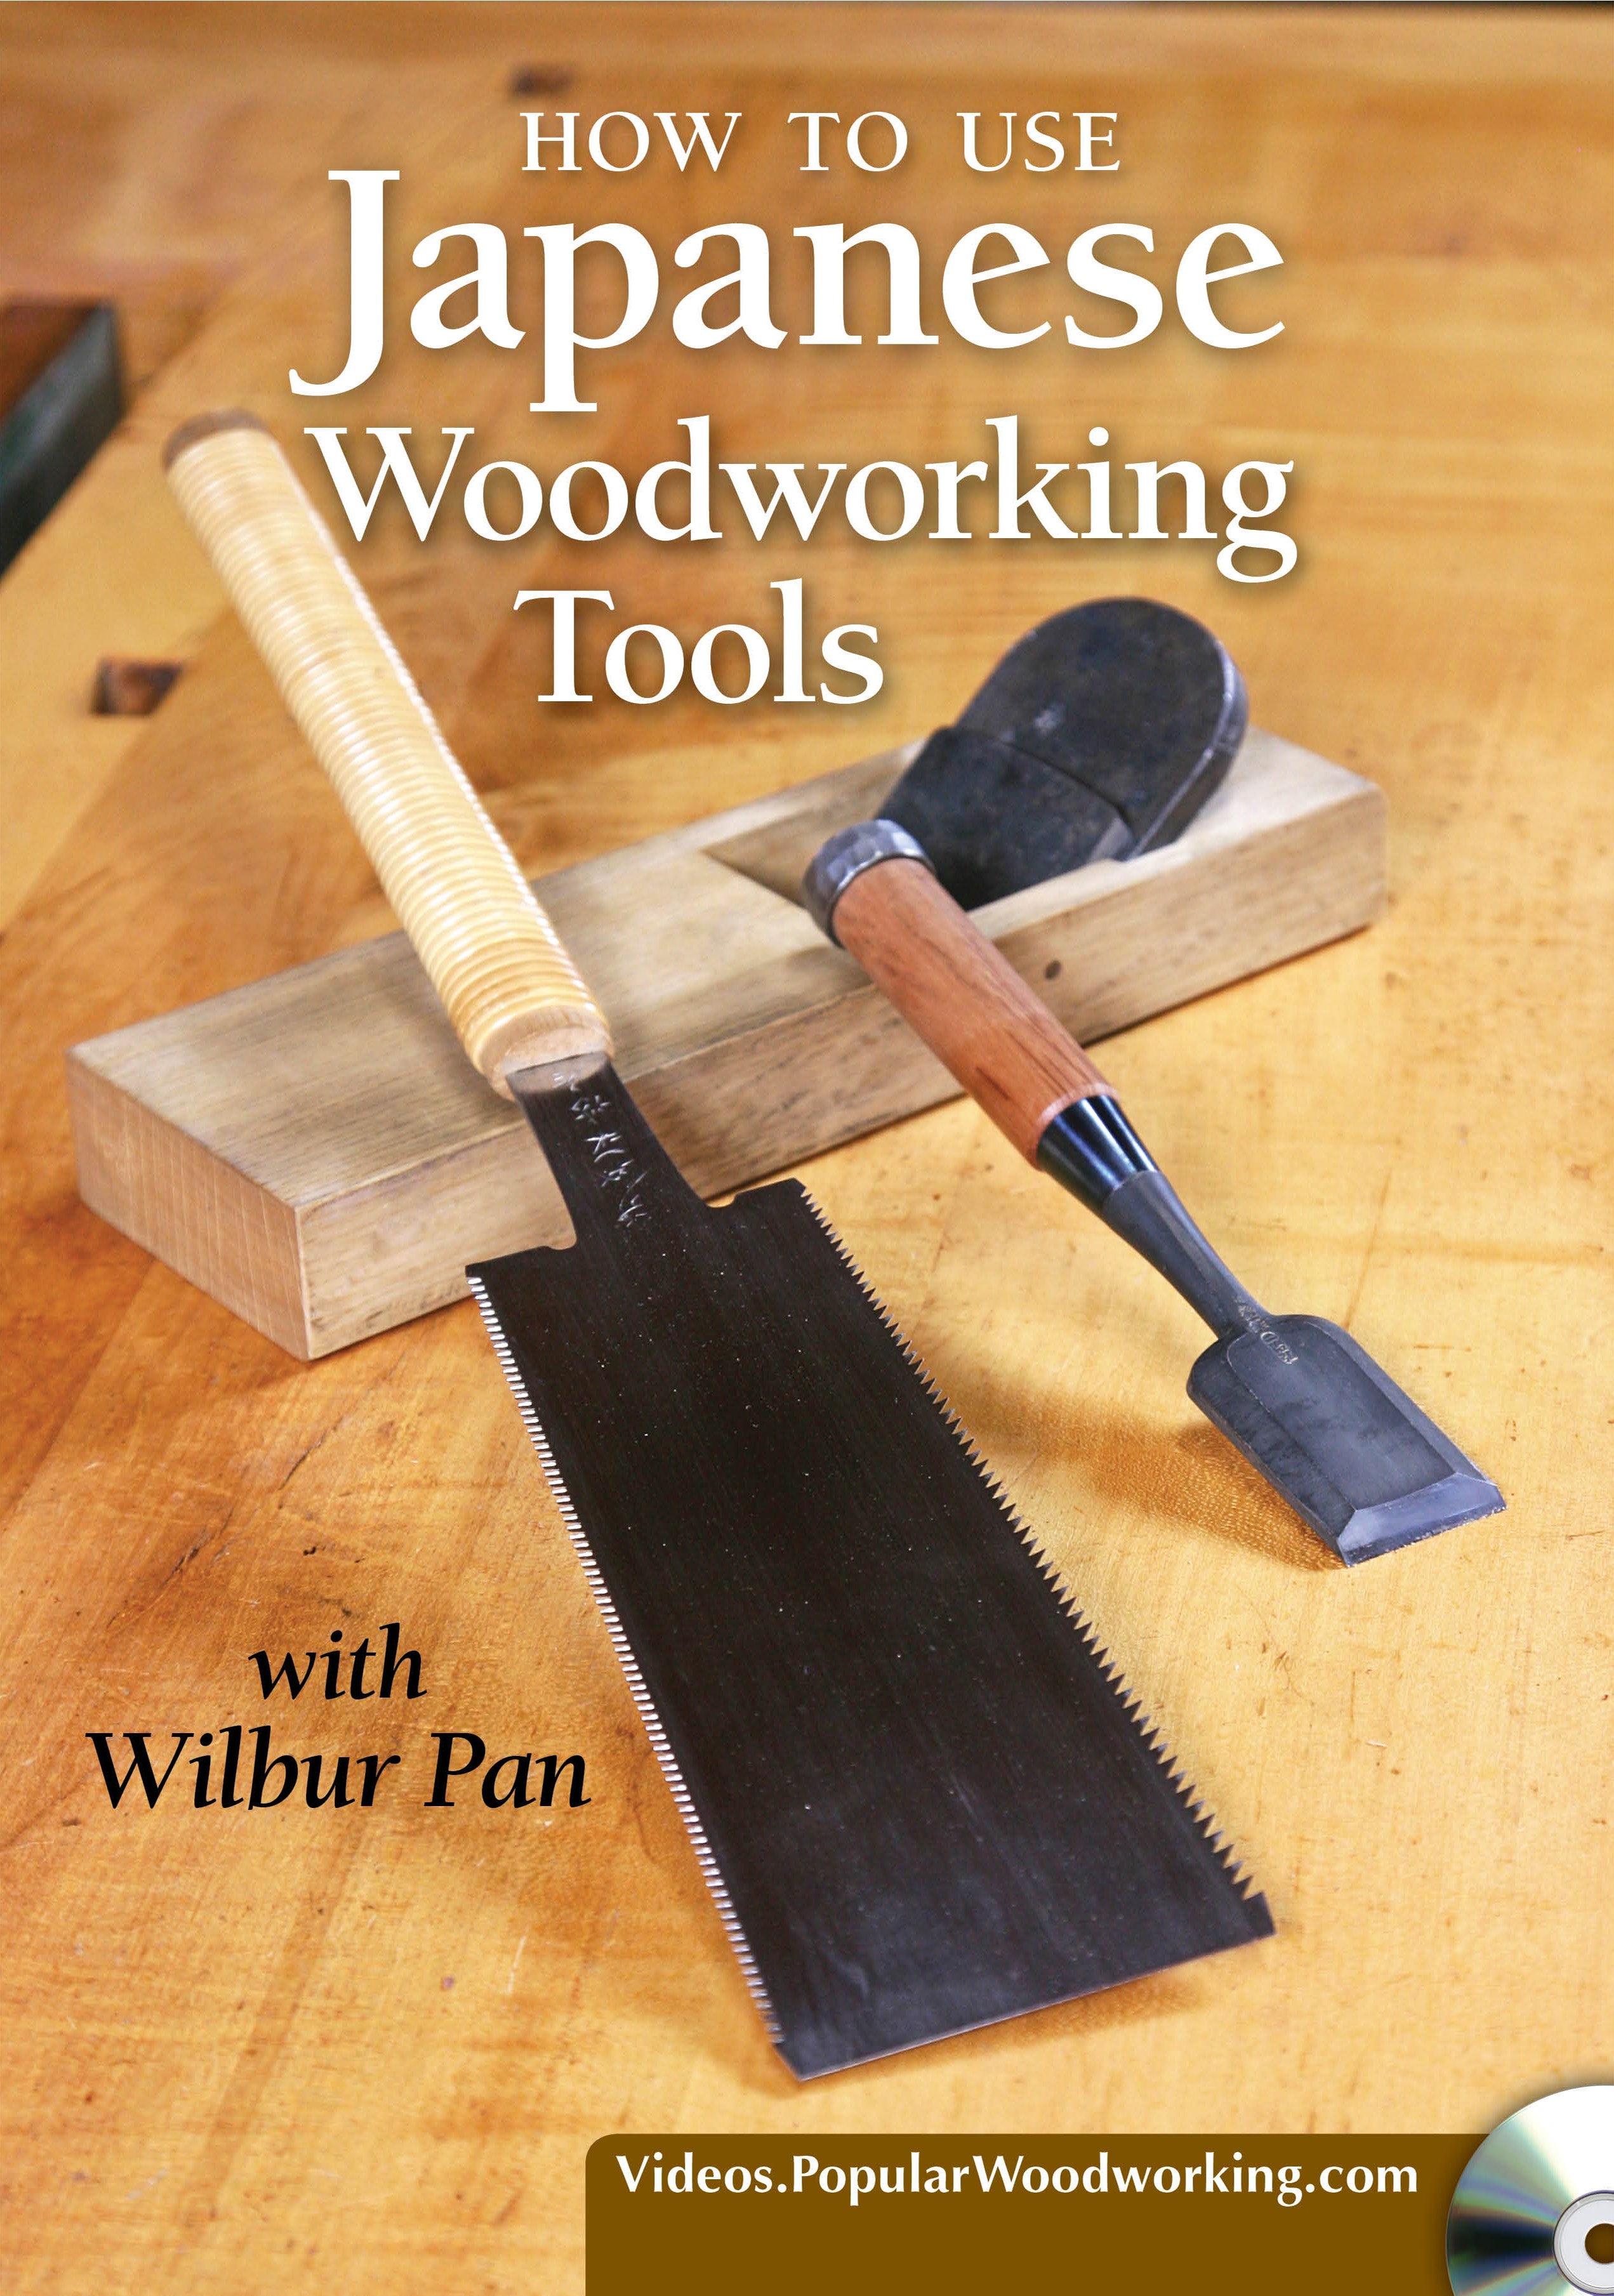 What Is Japanese Woodworking?